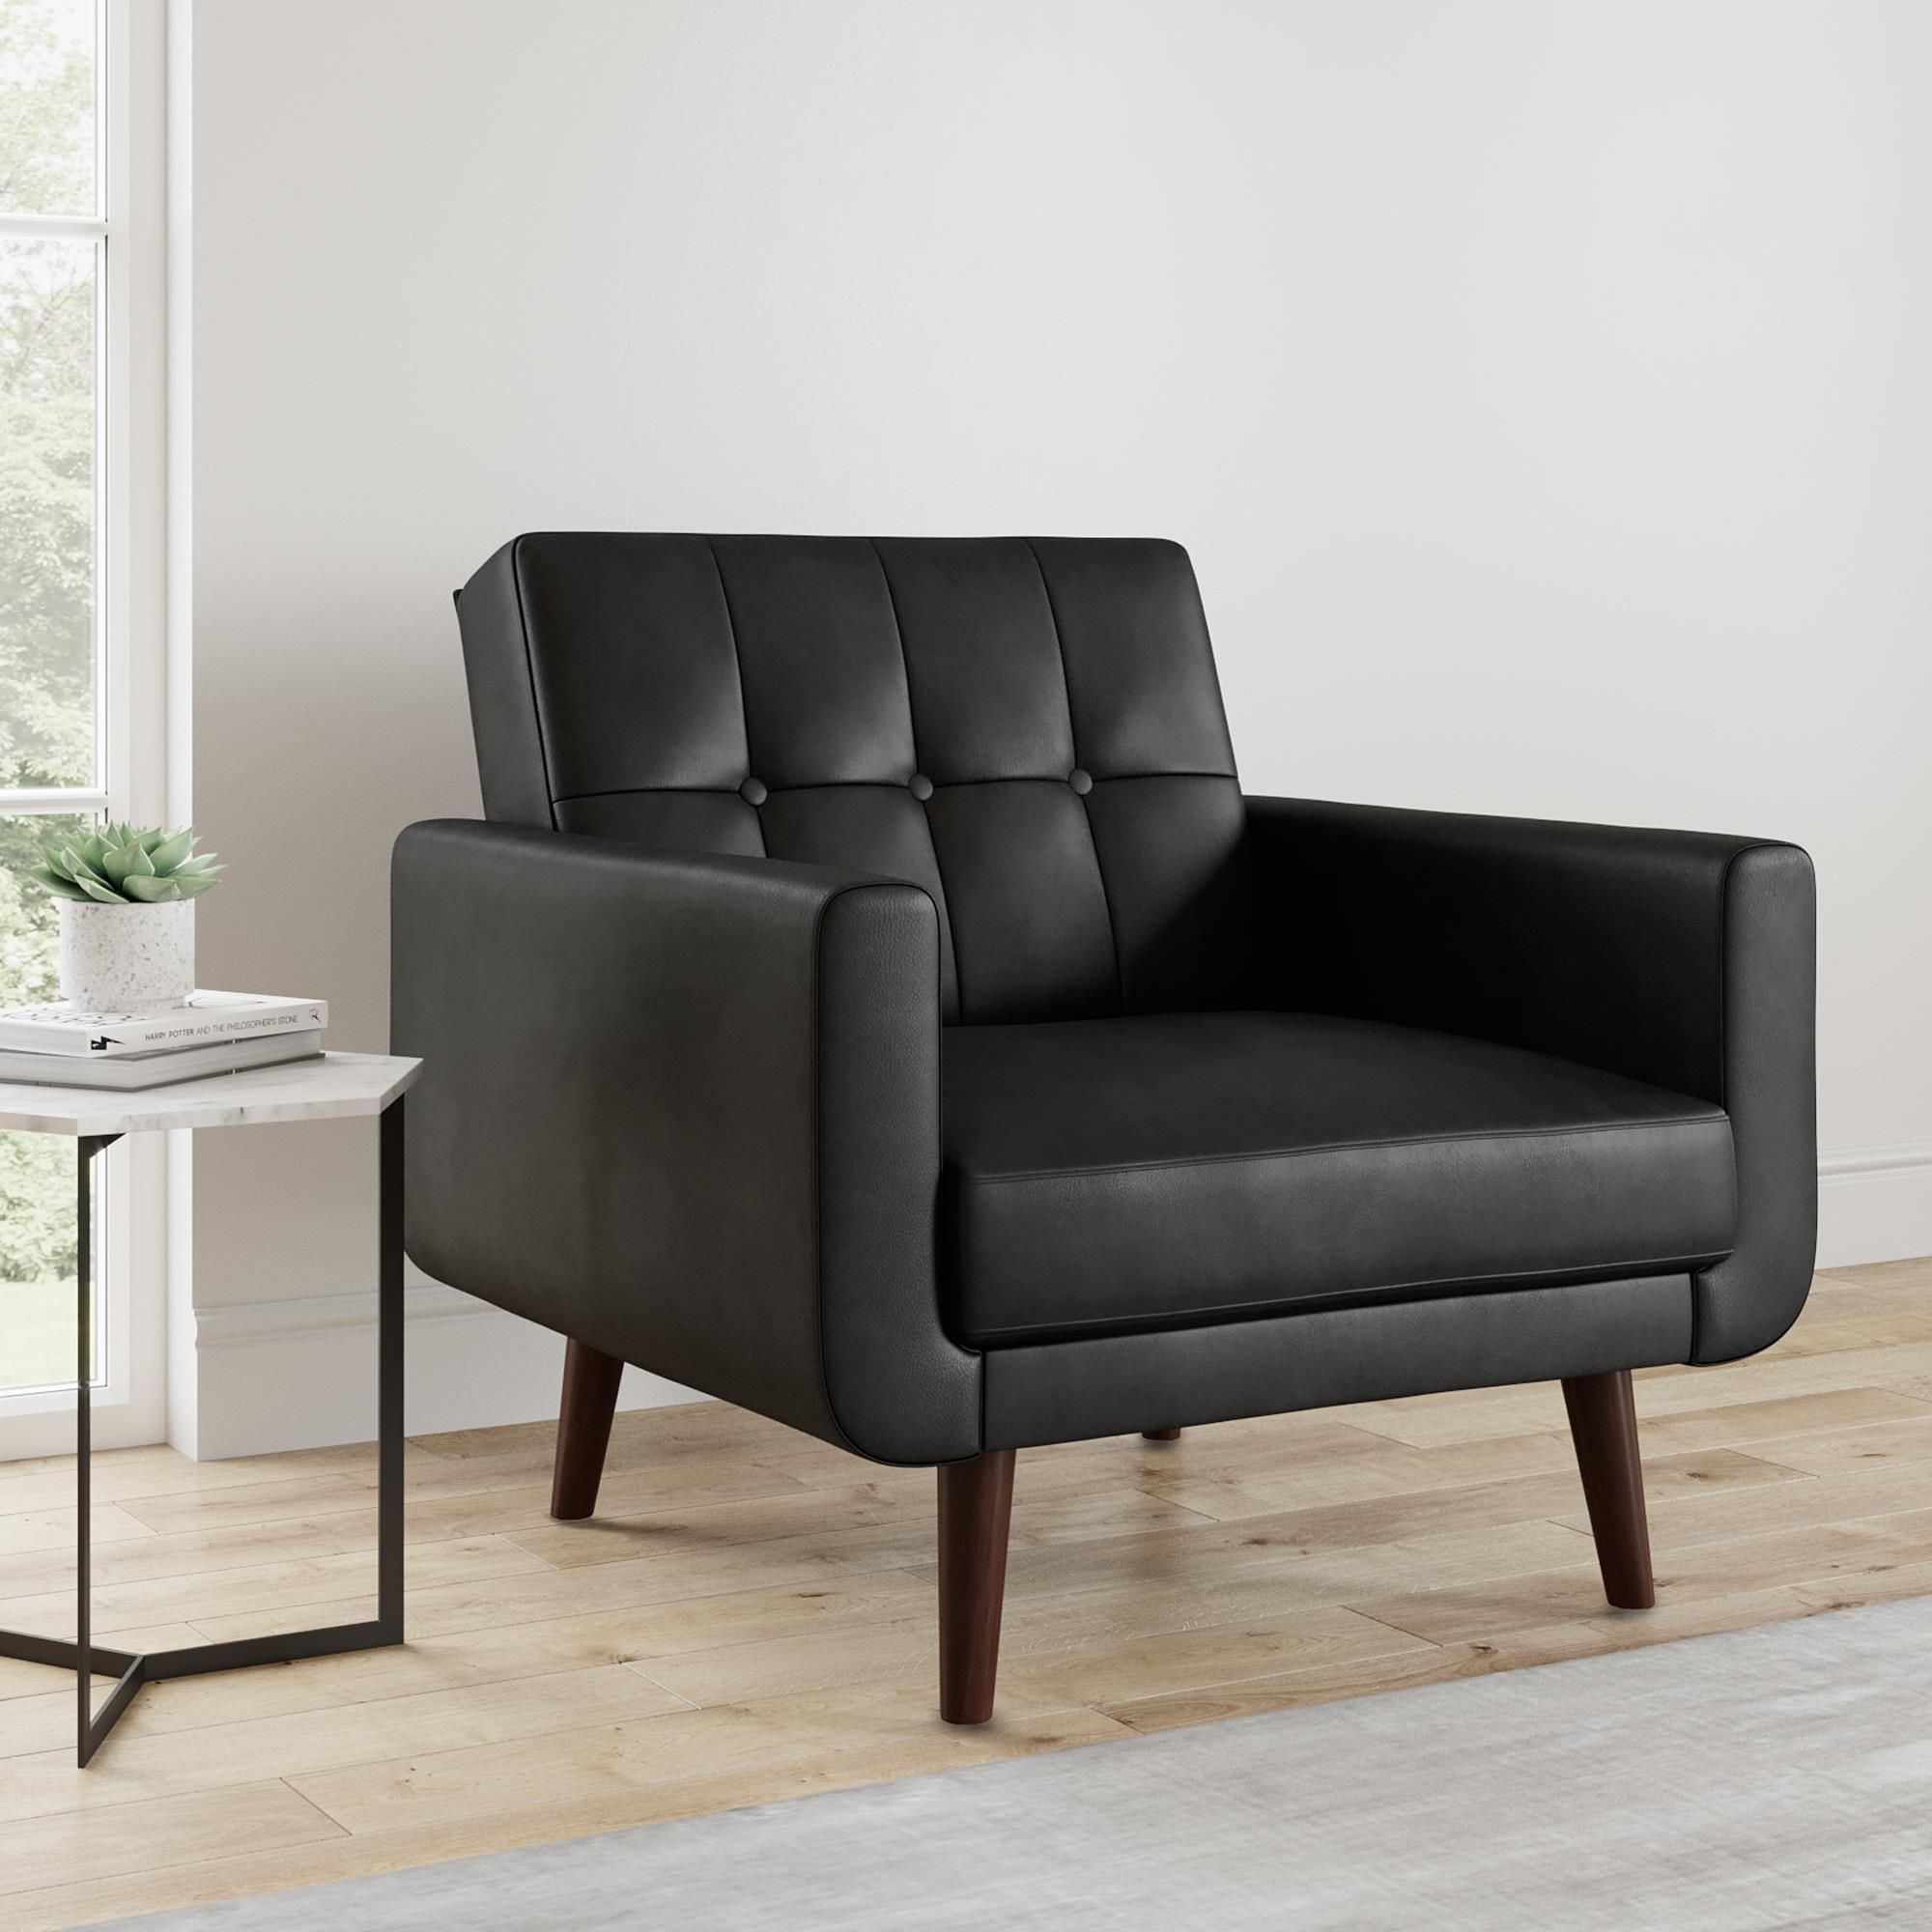 Better Homes & Gardens Nola Modern Chair with Arms, Black Faux Leather - Walmart.com | Walmart (US)